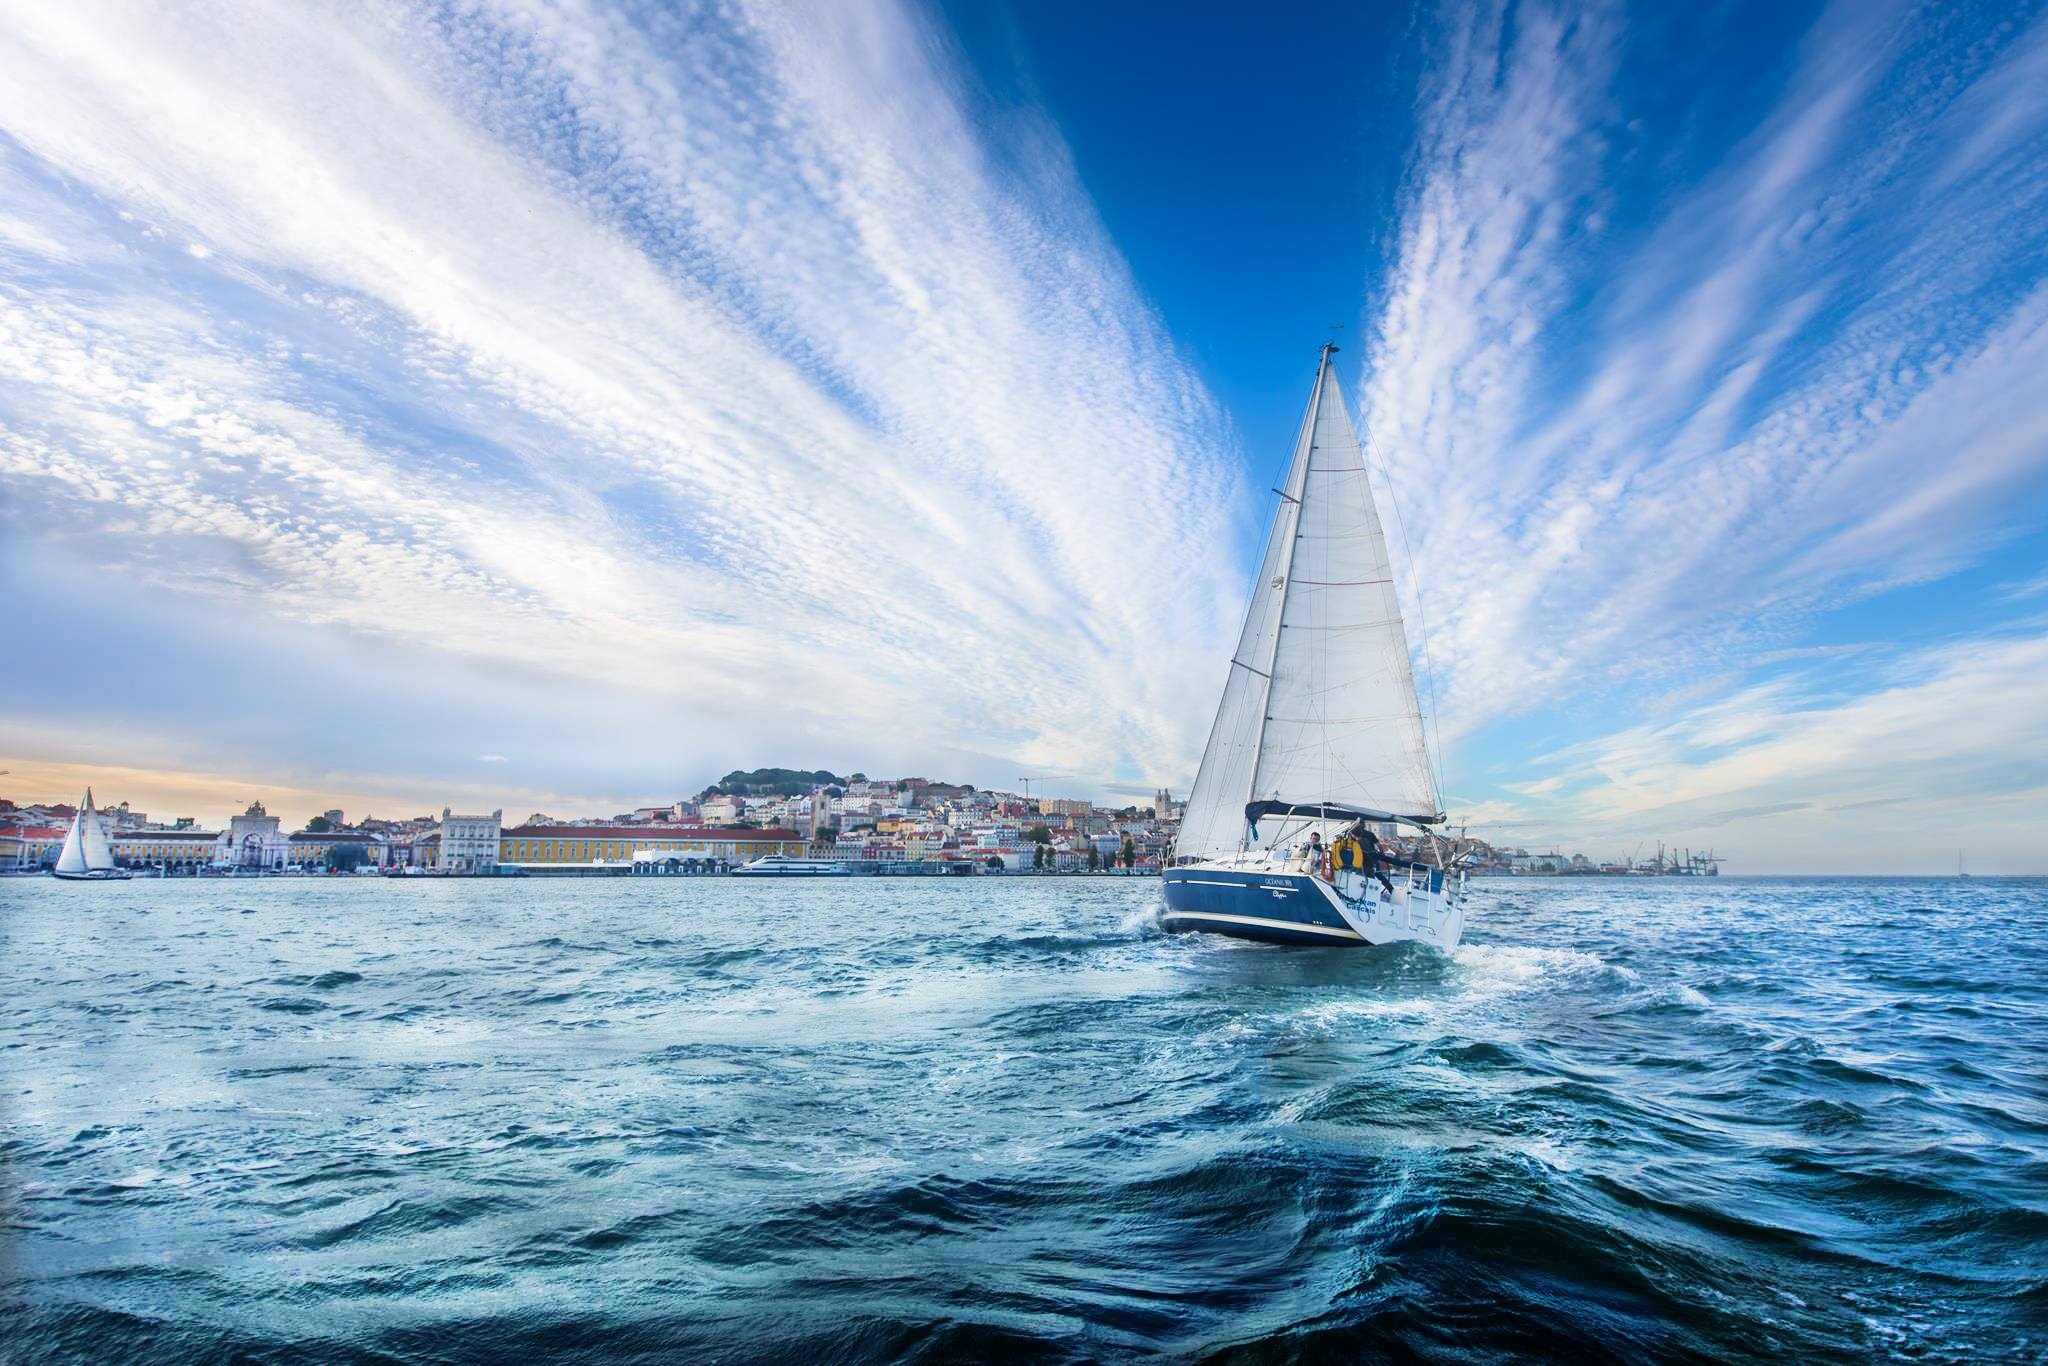 Sightseeing Boat Tour in Lisbon